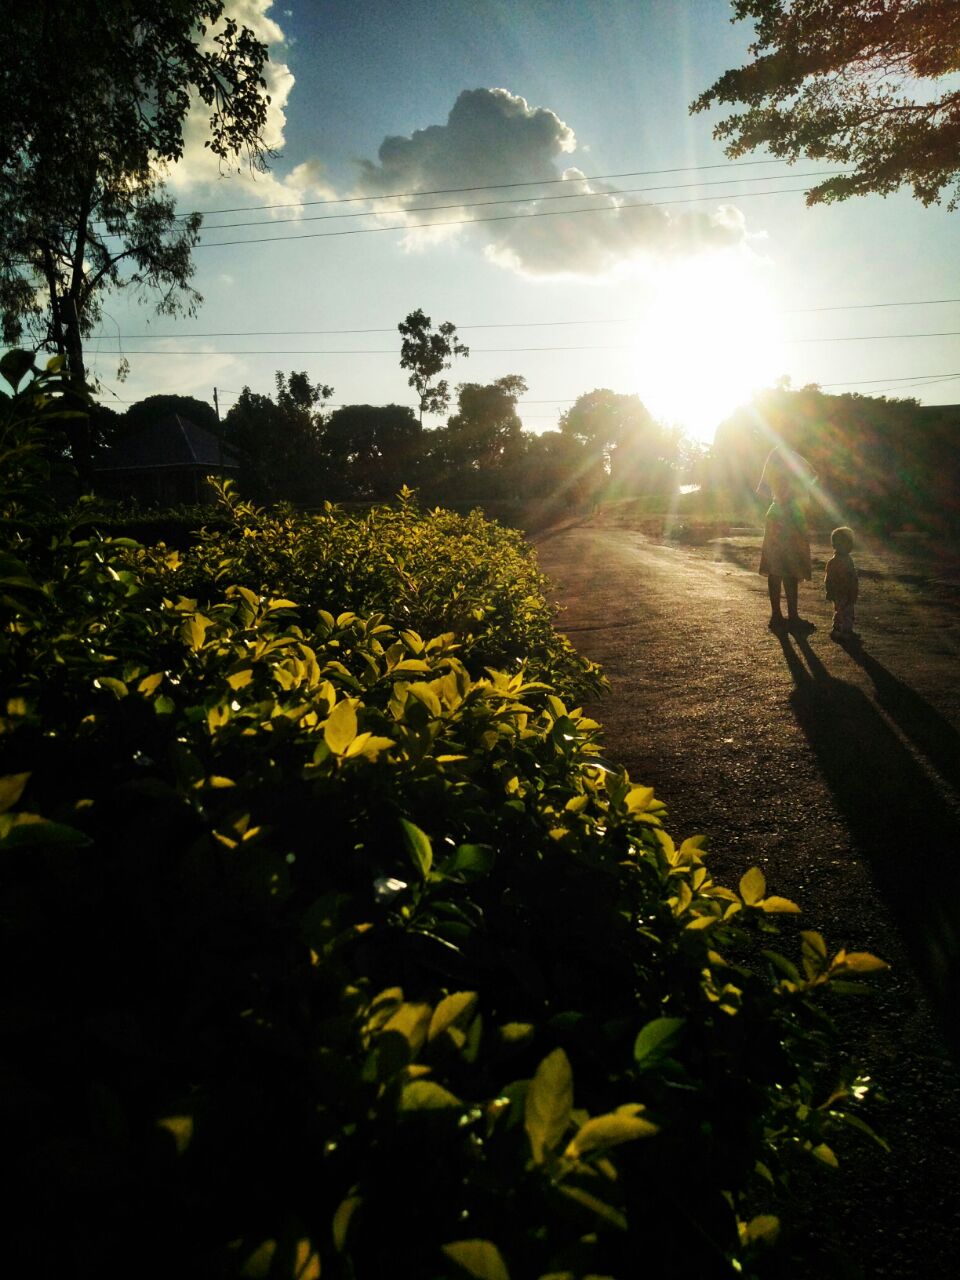 a group of people walking on a path with yellow flowers on the side